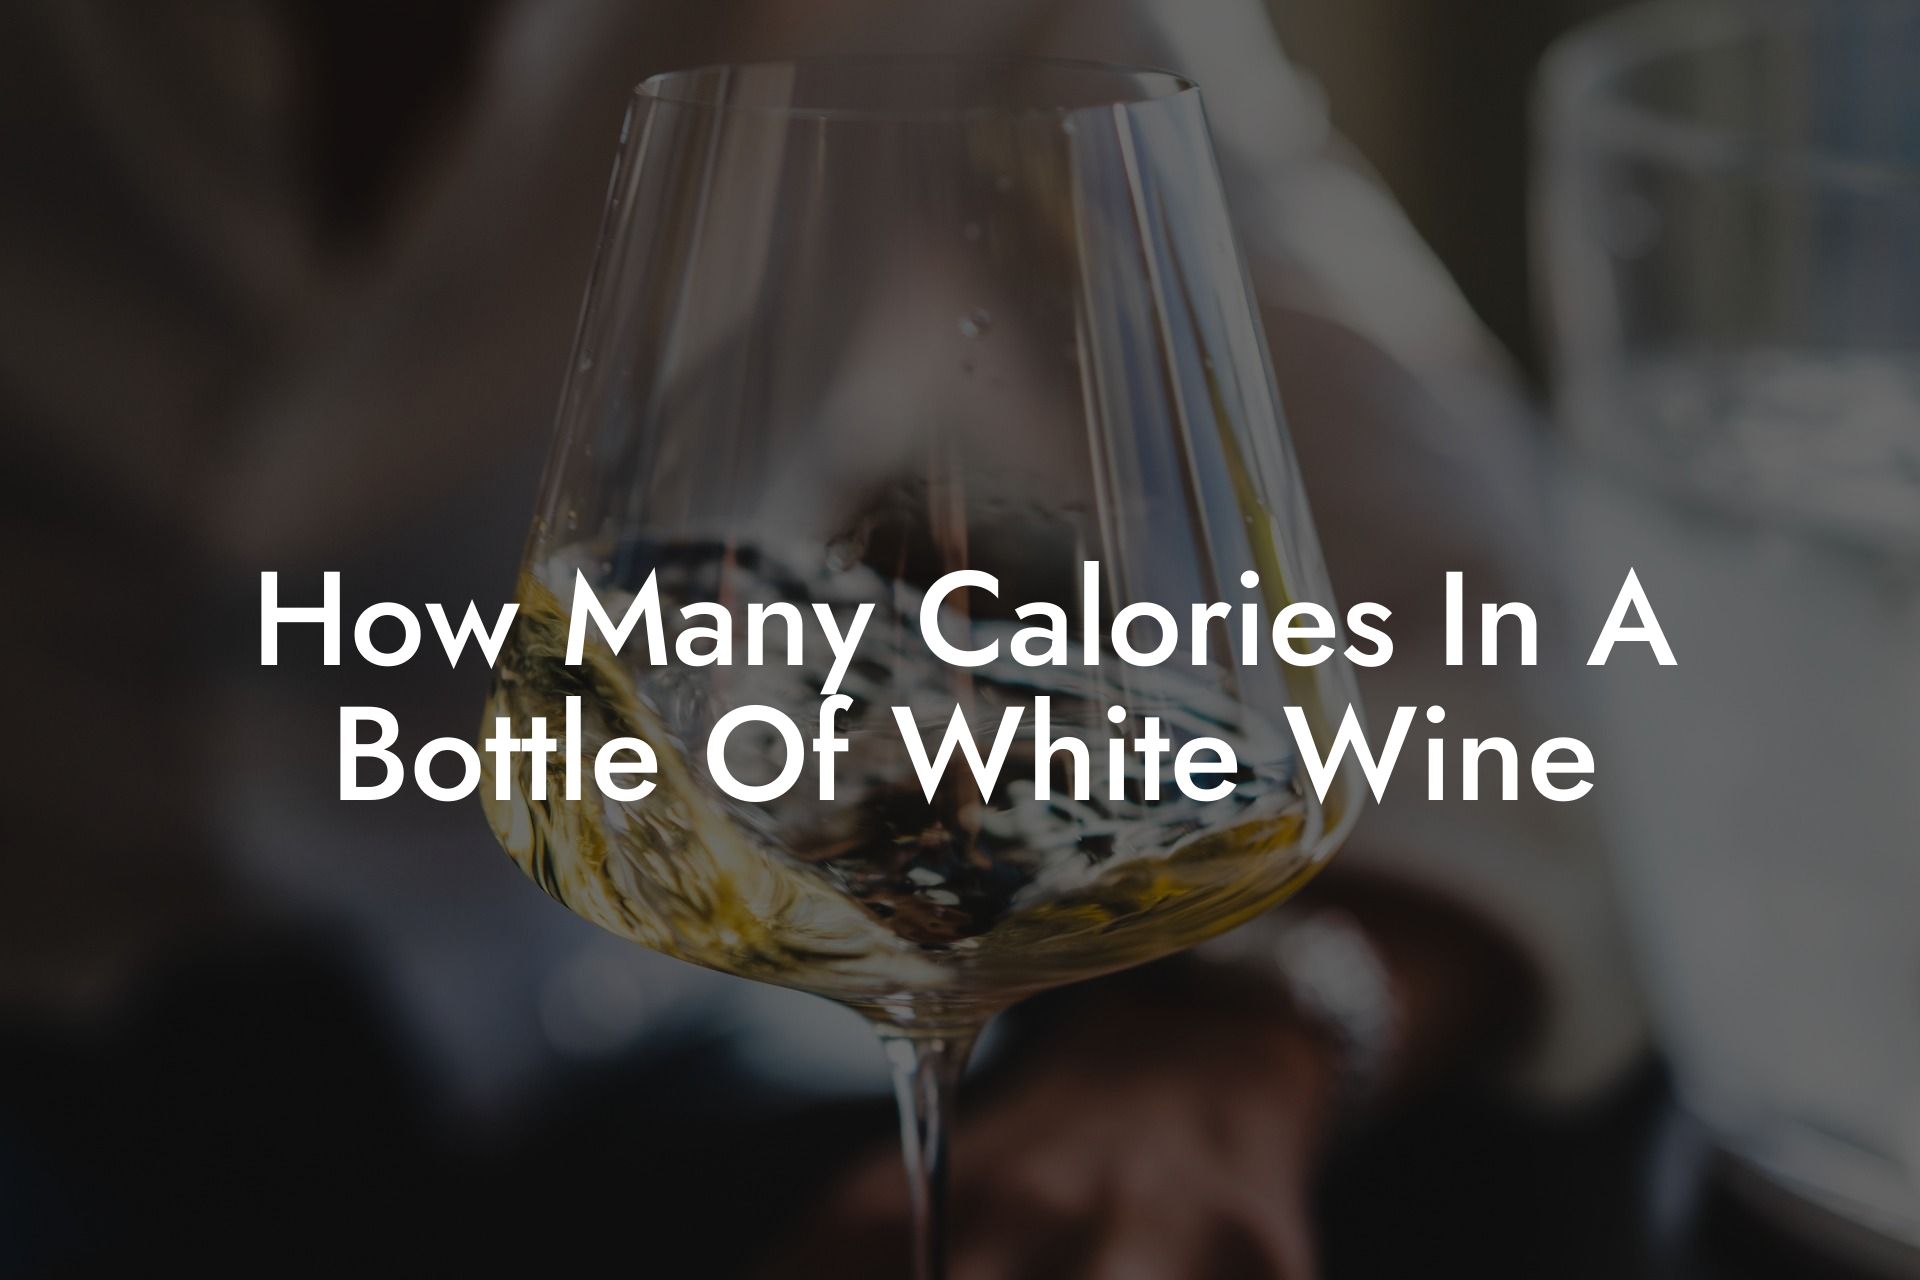 How Many Calories In A Bottle Of White Wine